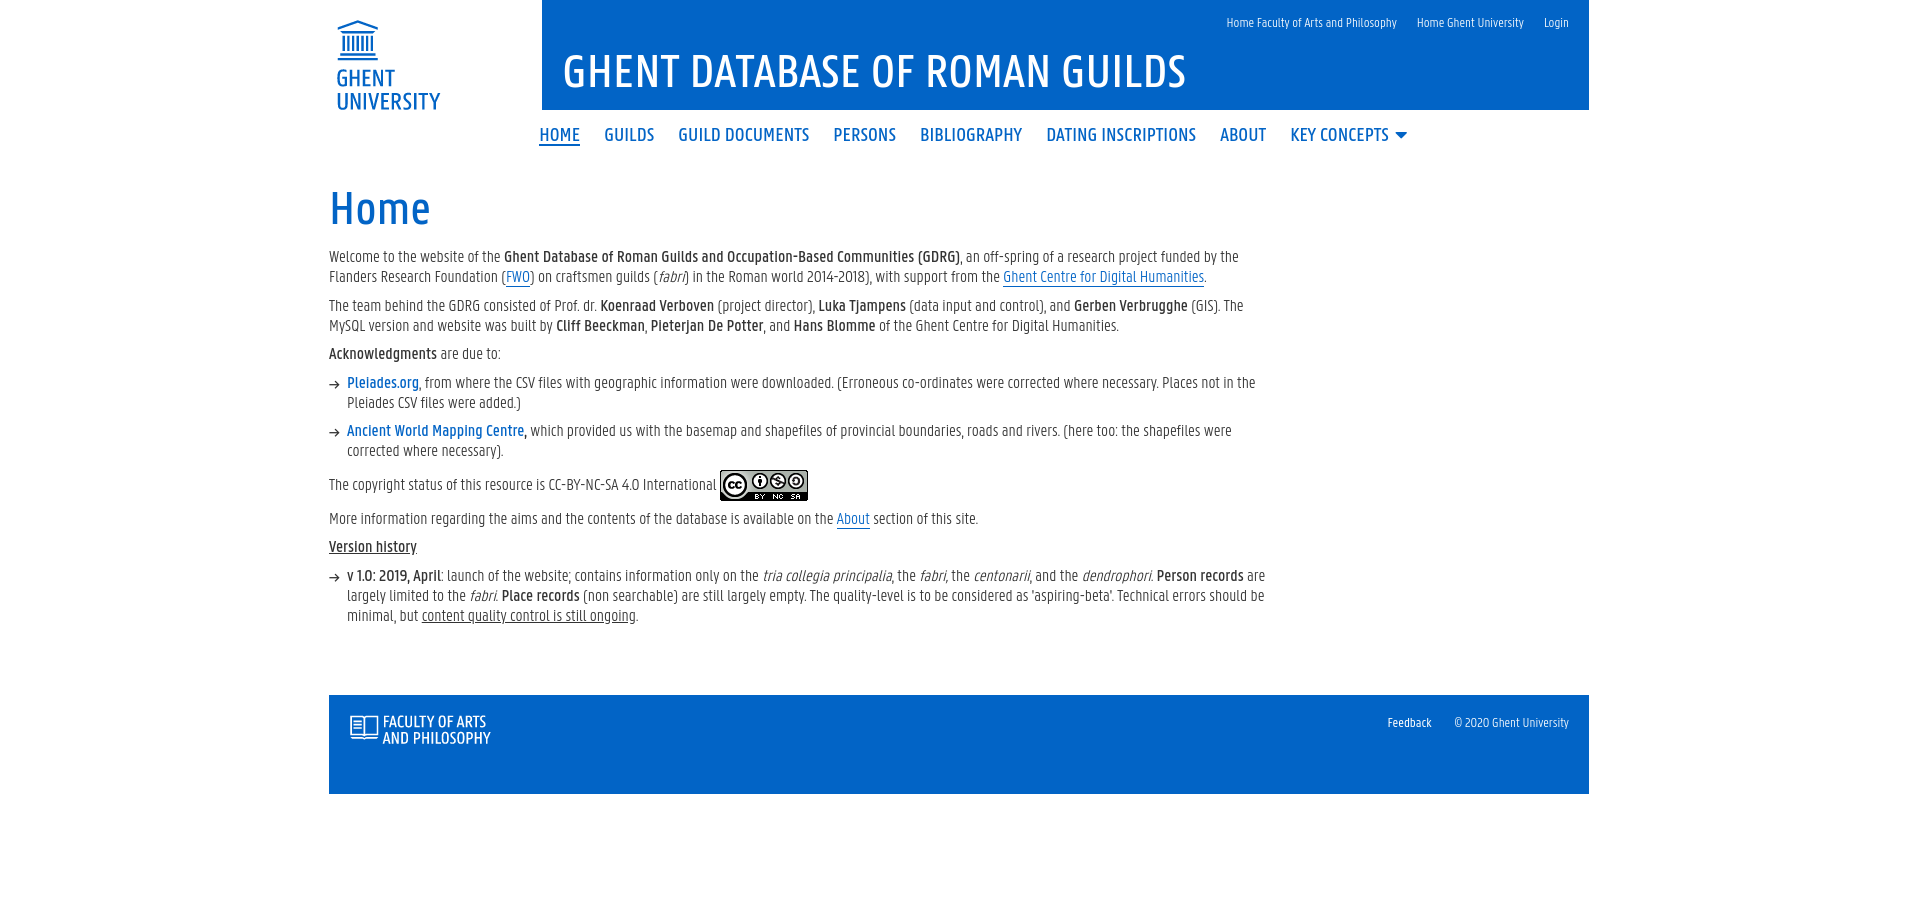 Home page of GDRG